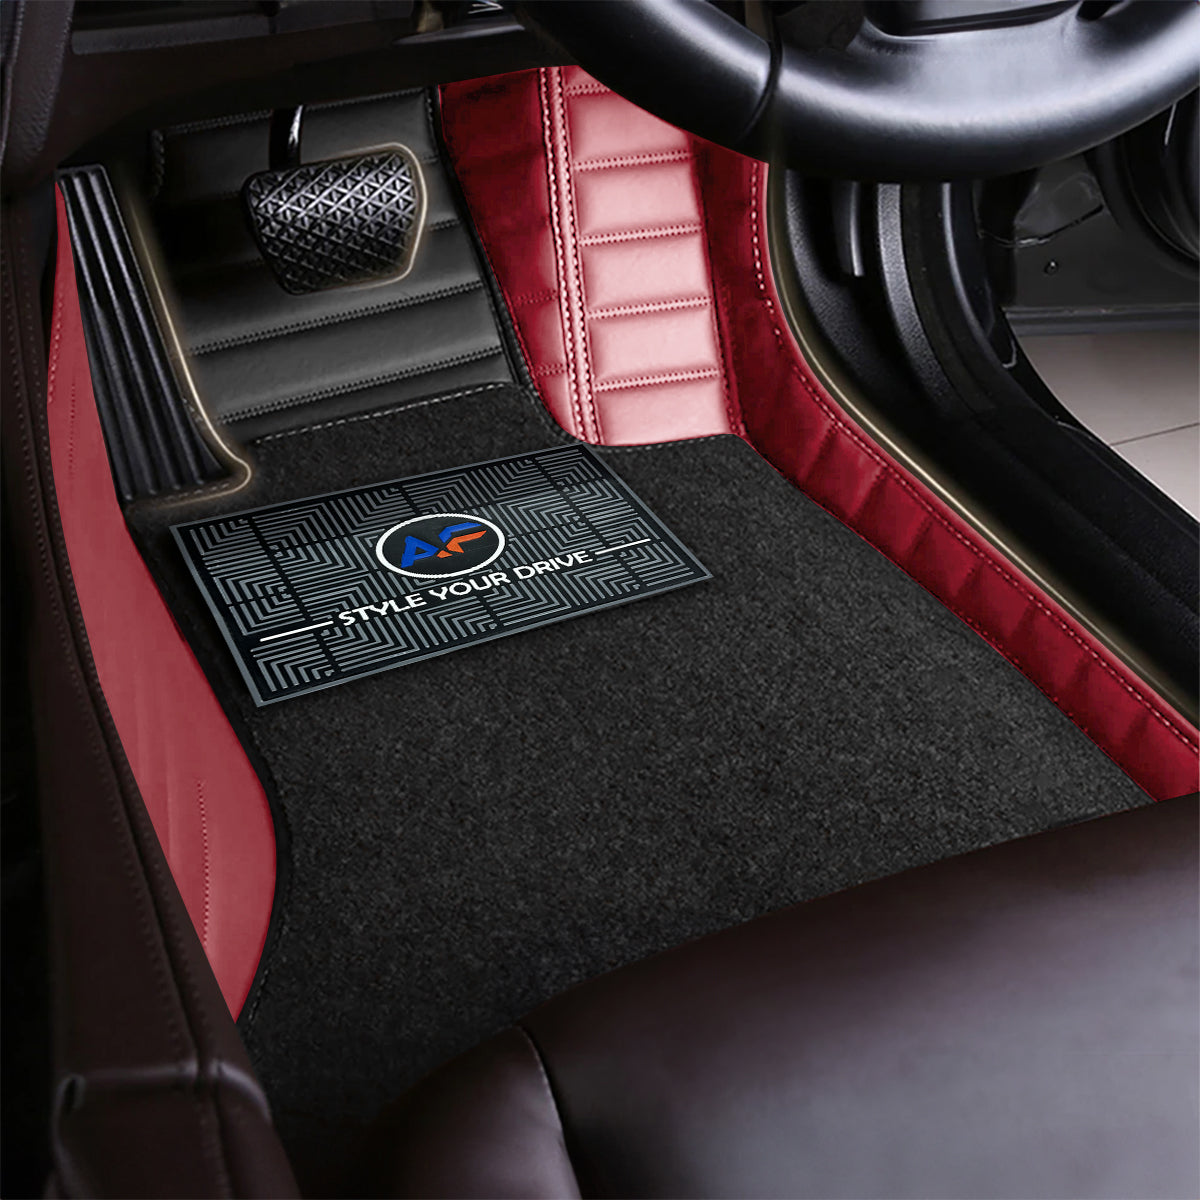 Autofurnish 9D Combination Custom Fitted Car Mats For Mercedes GLC Coupe 300d 4MATIC 2020 - Black VT-Coffee